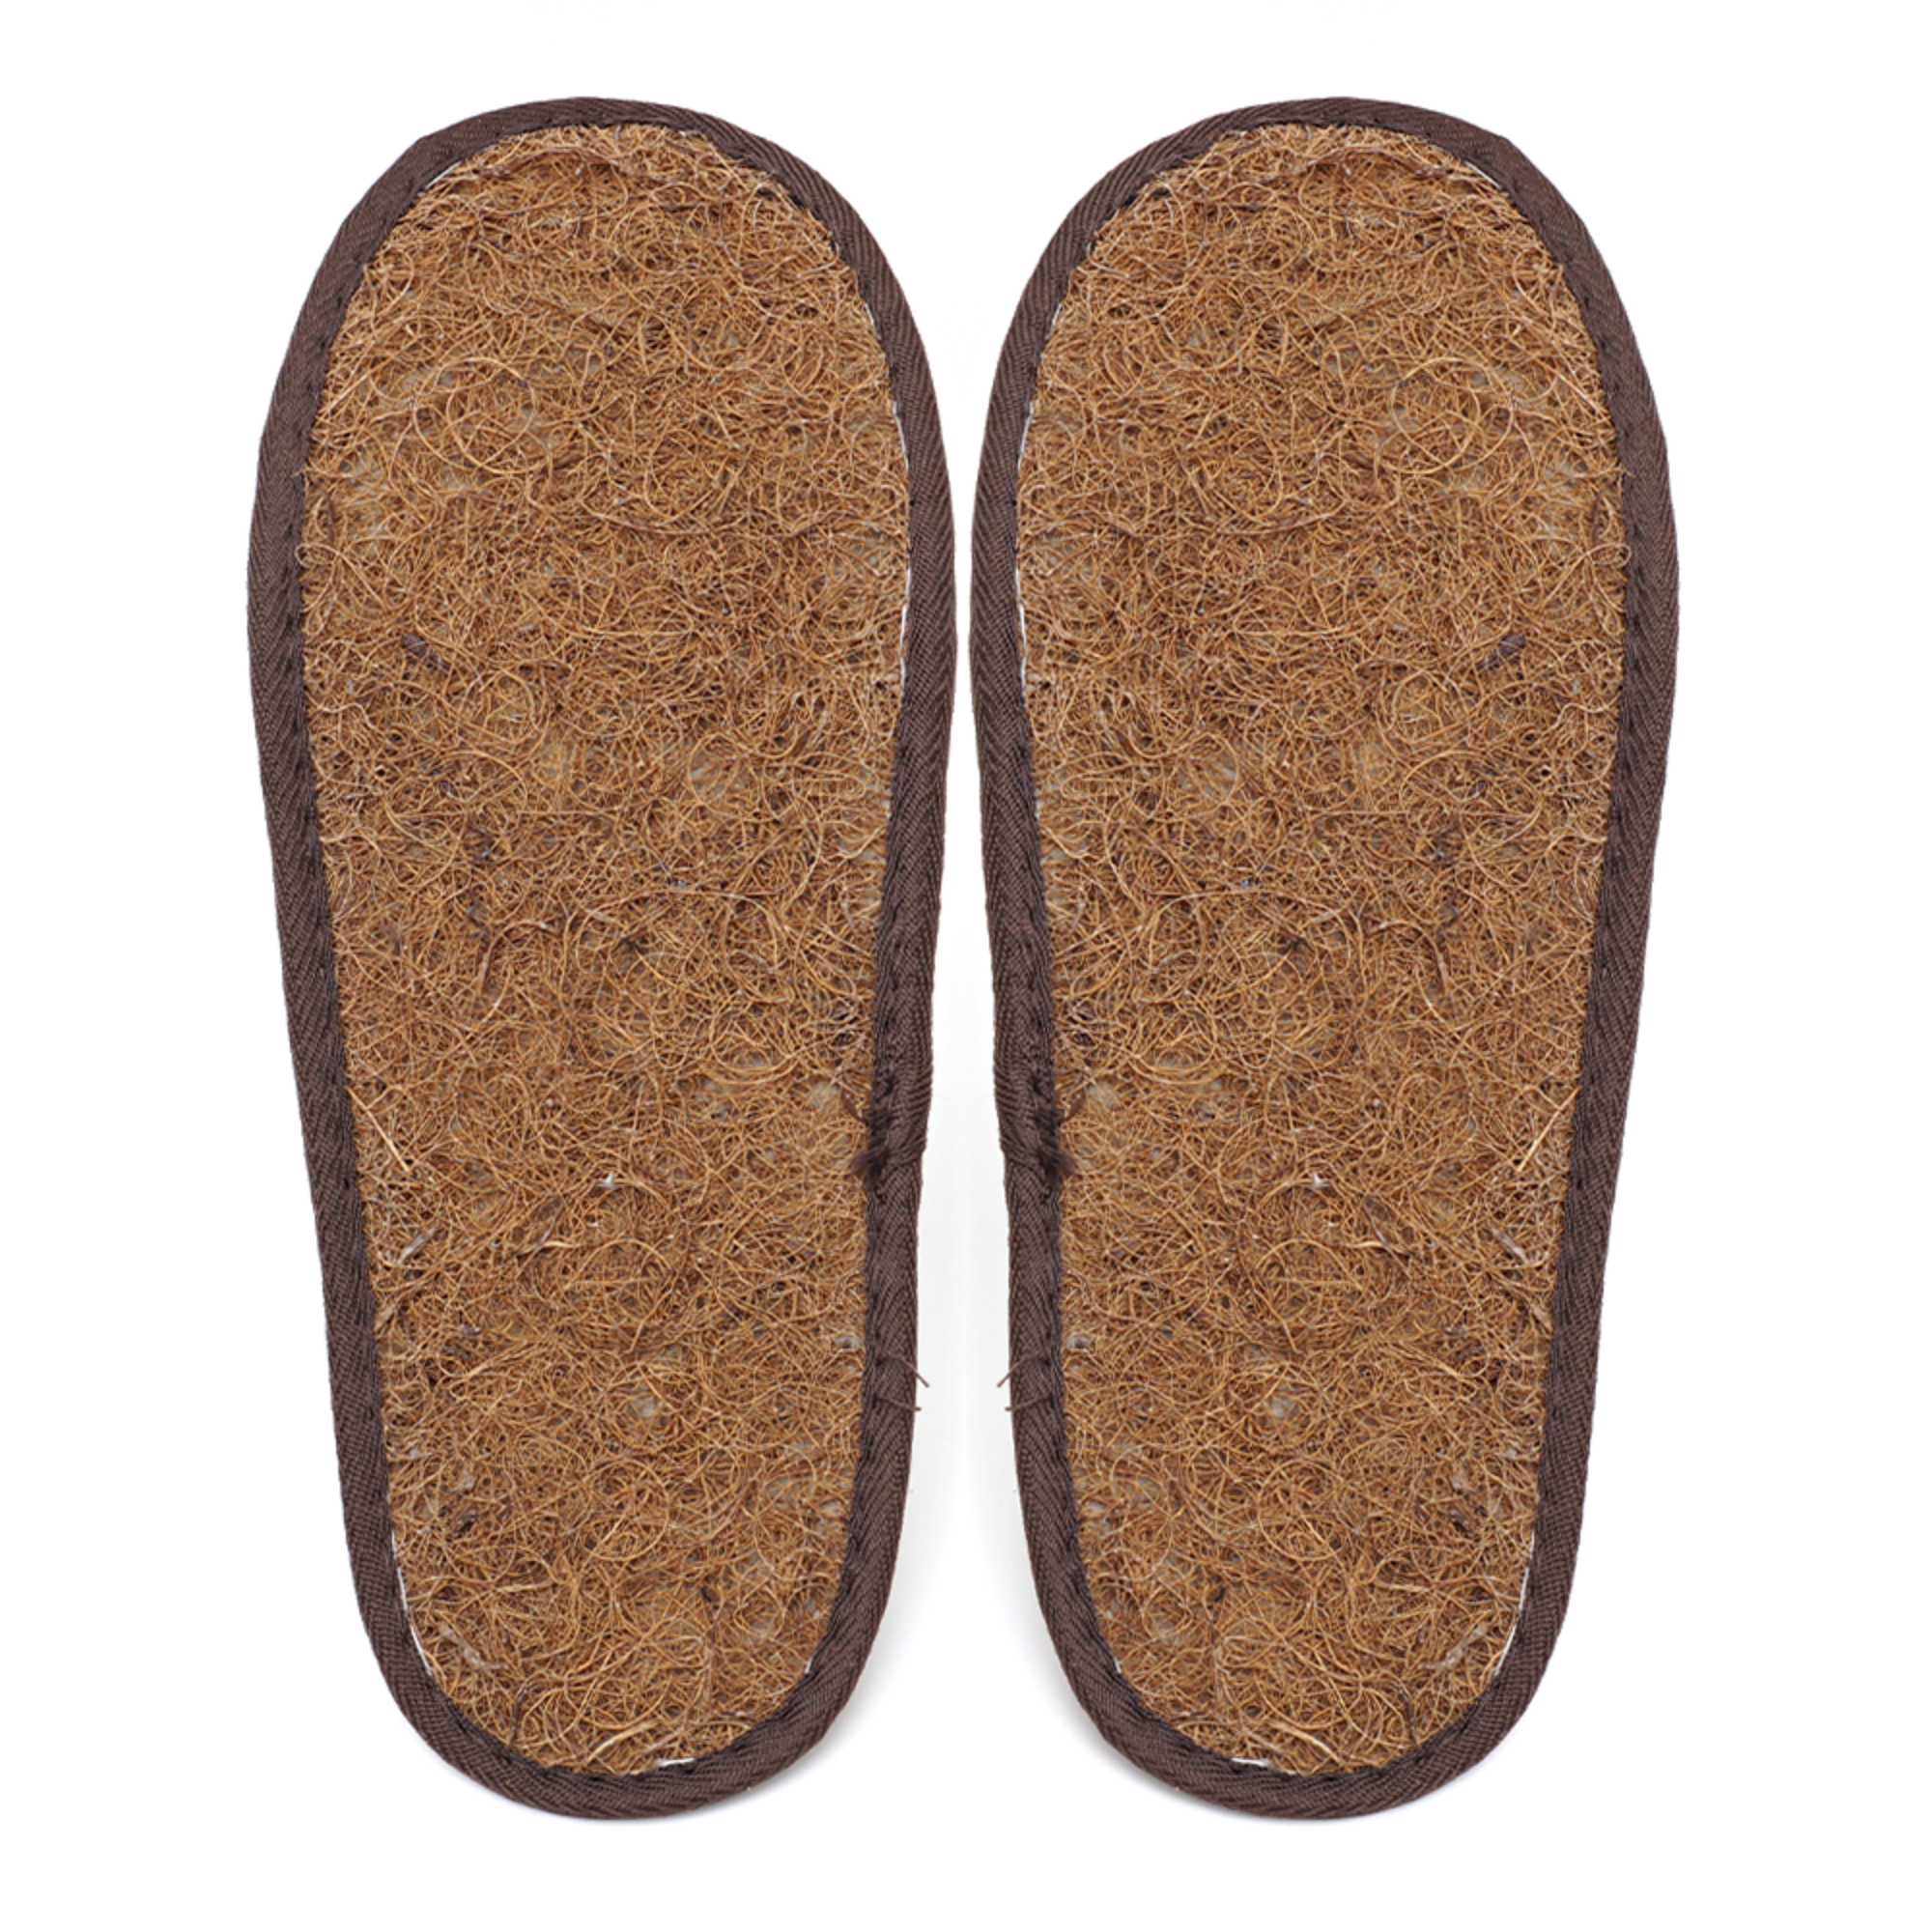 Upcycles wood, coir, straw into Hotel Slippers